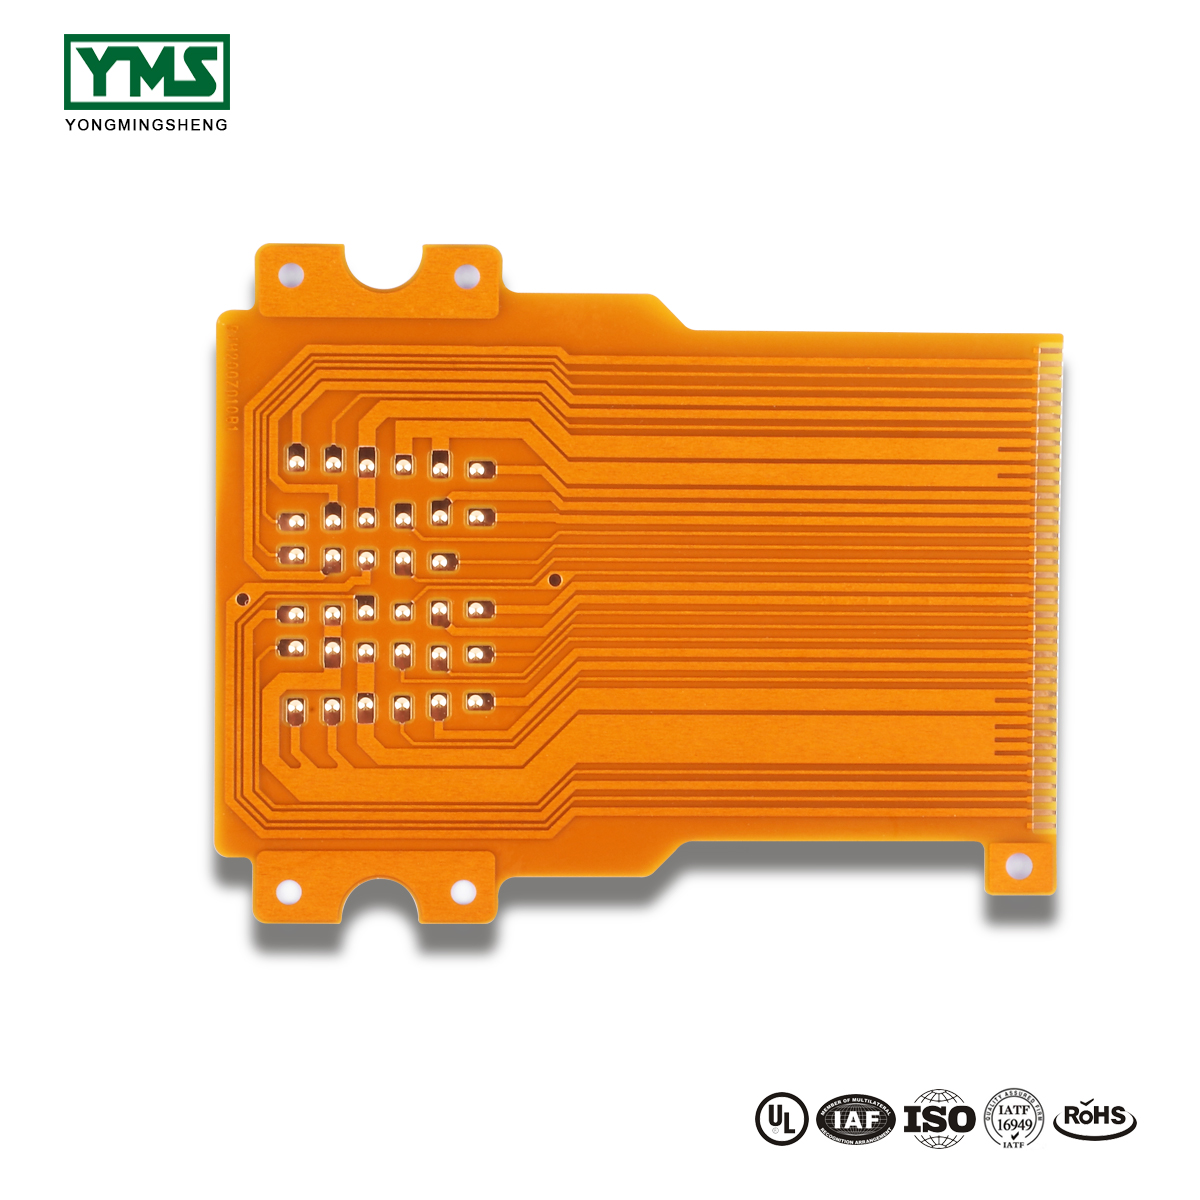 Big Discount Bare Pcb Board Ceramic - 1Layer Raised Point flexible Board | YMSPCB – Yongmingsheng